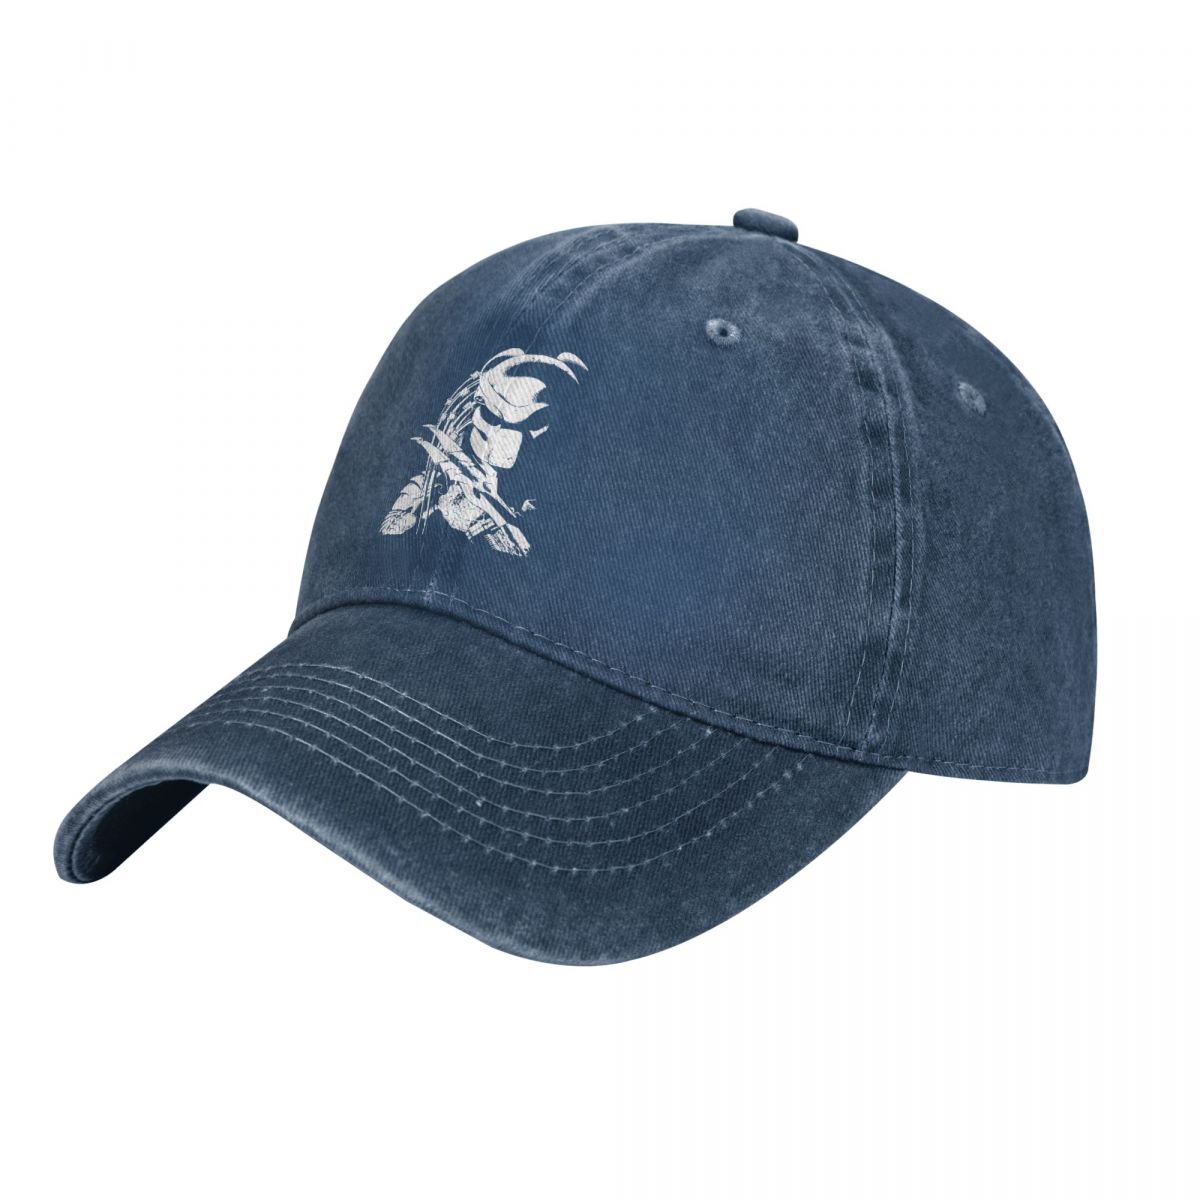 Predator - You Know It's Going Down - Snapback Baseball Cap - Summer Hat For Men and Women-Navy Blue-One Size-